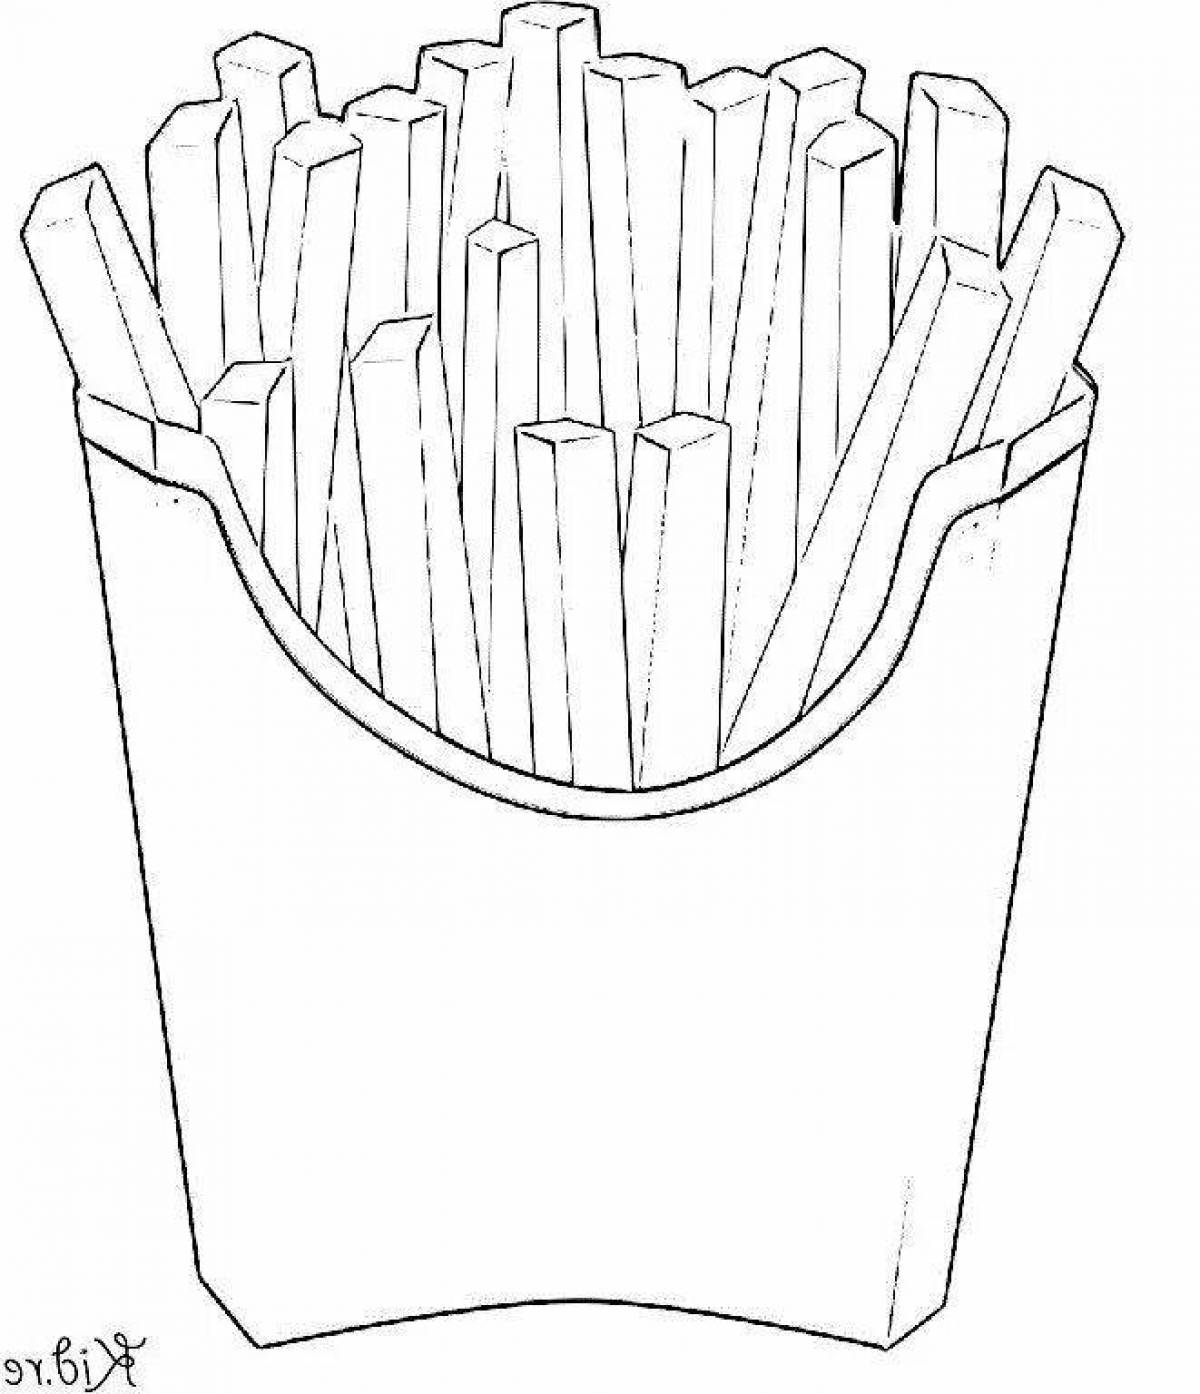 French fries coloring page